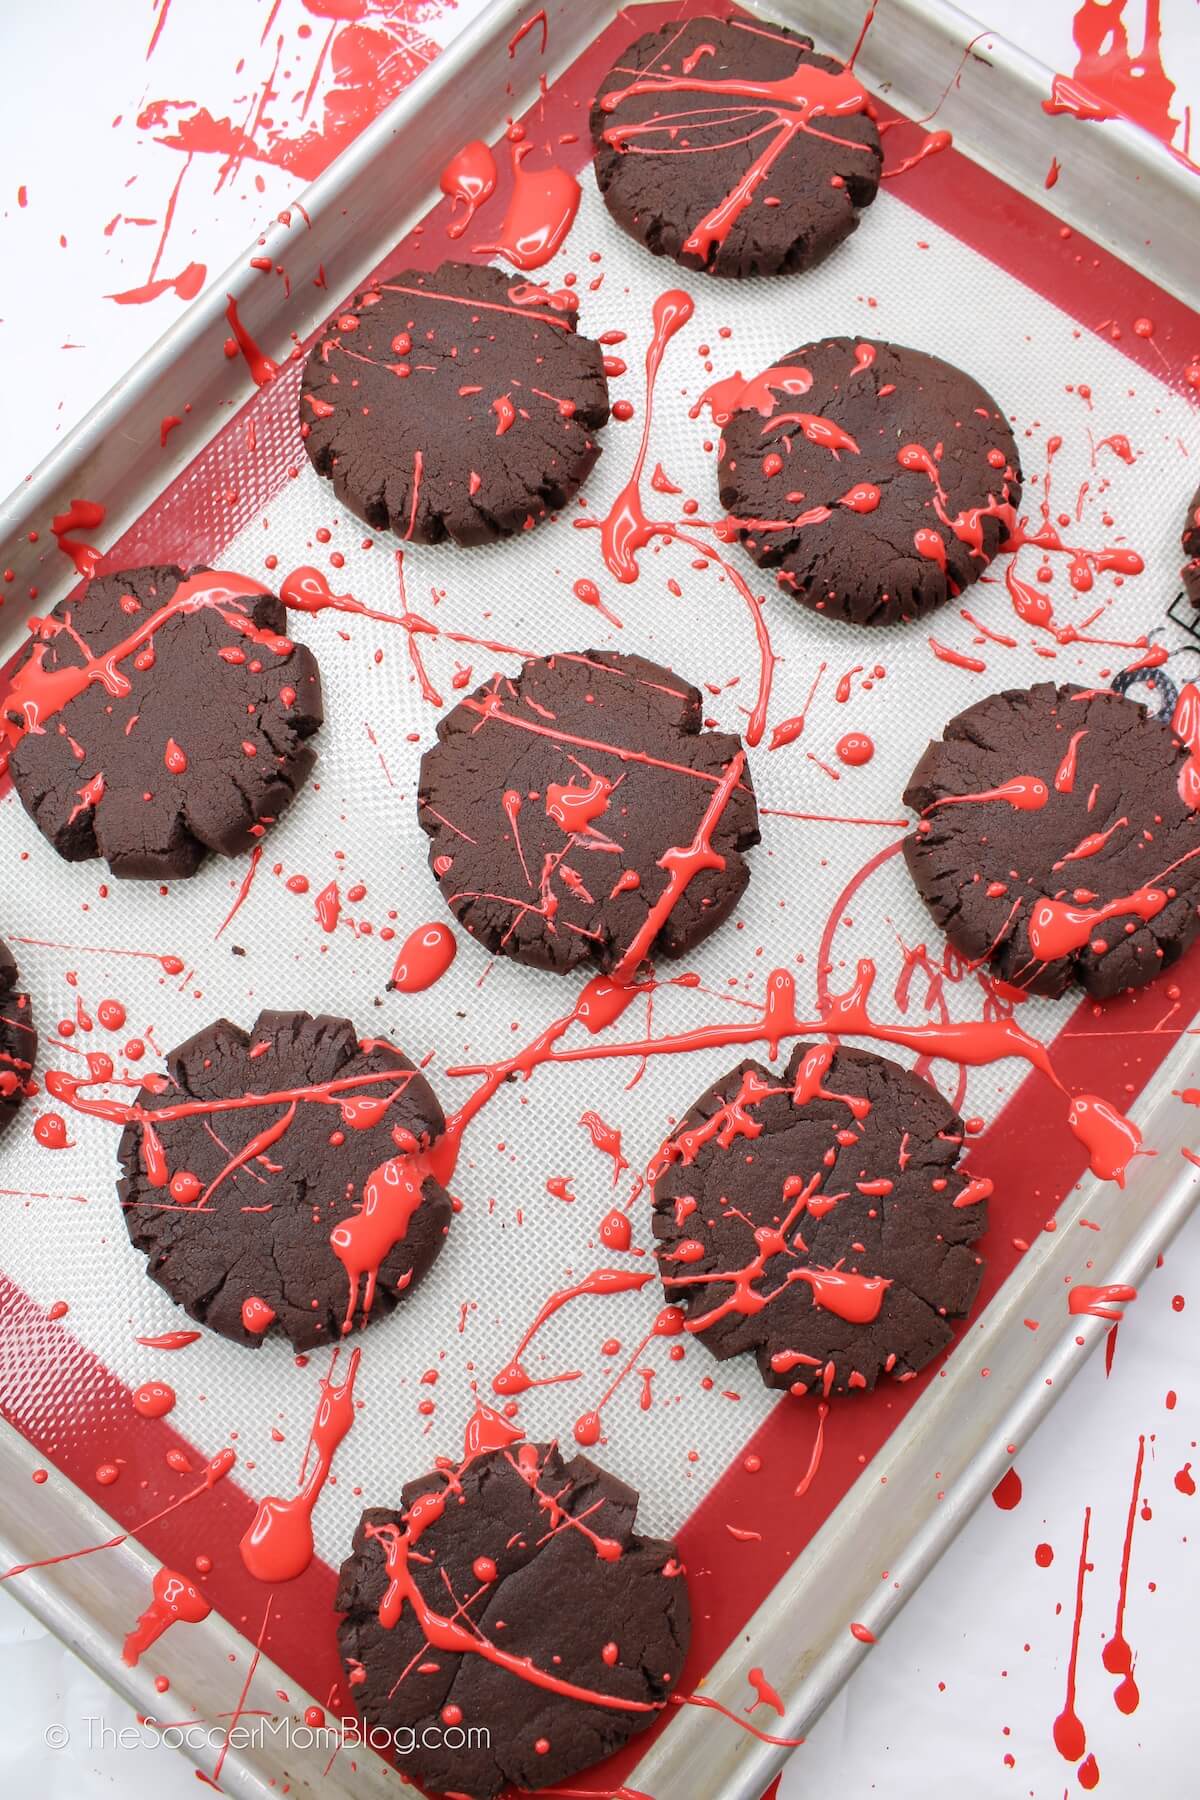 tray of chocolate cookies with splattered red frosting